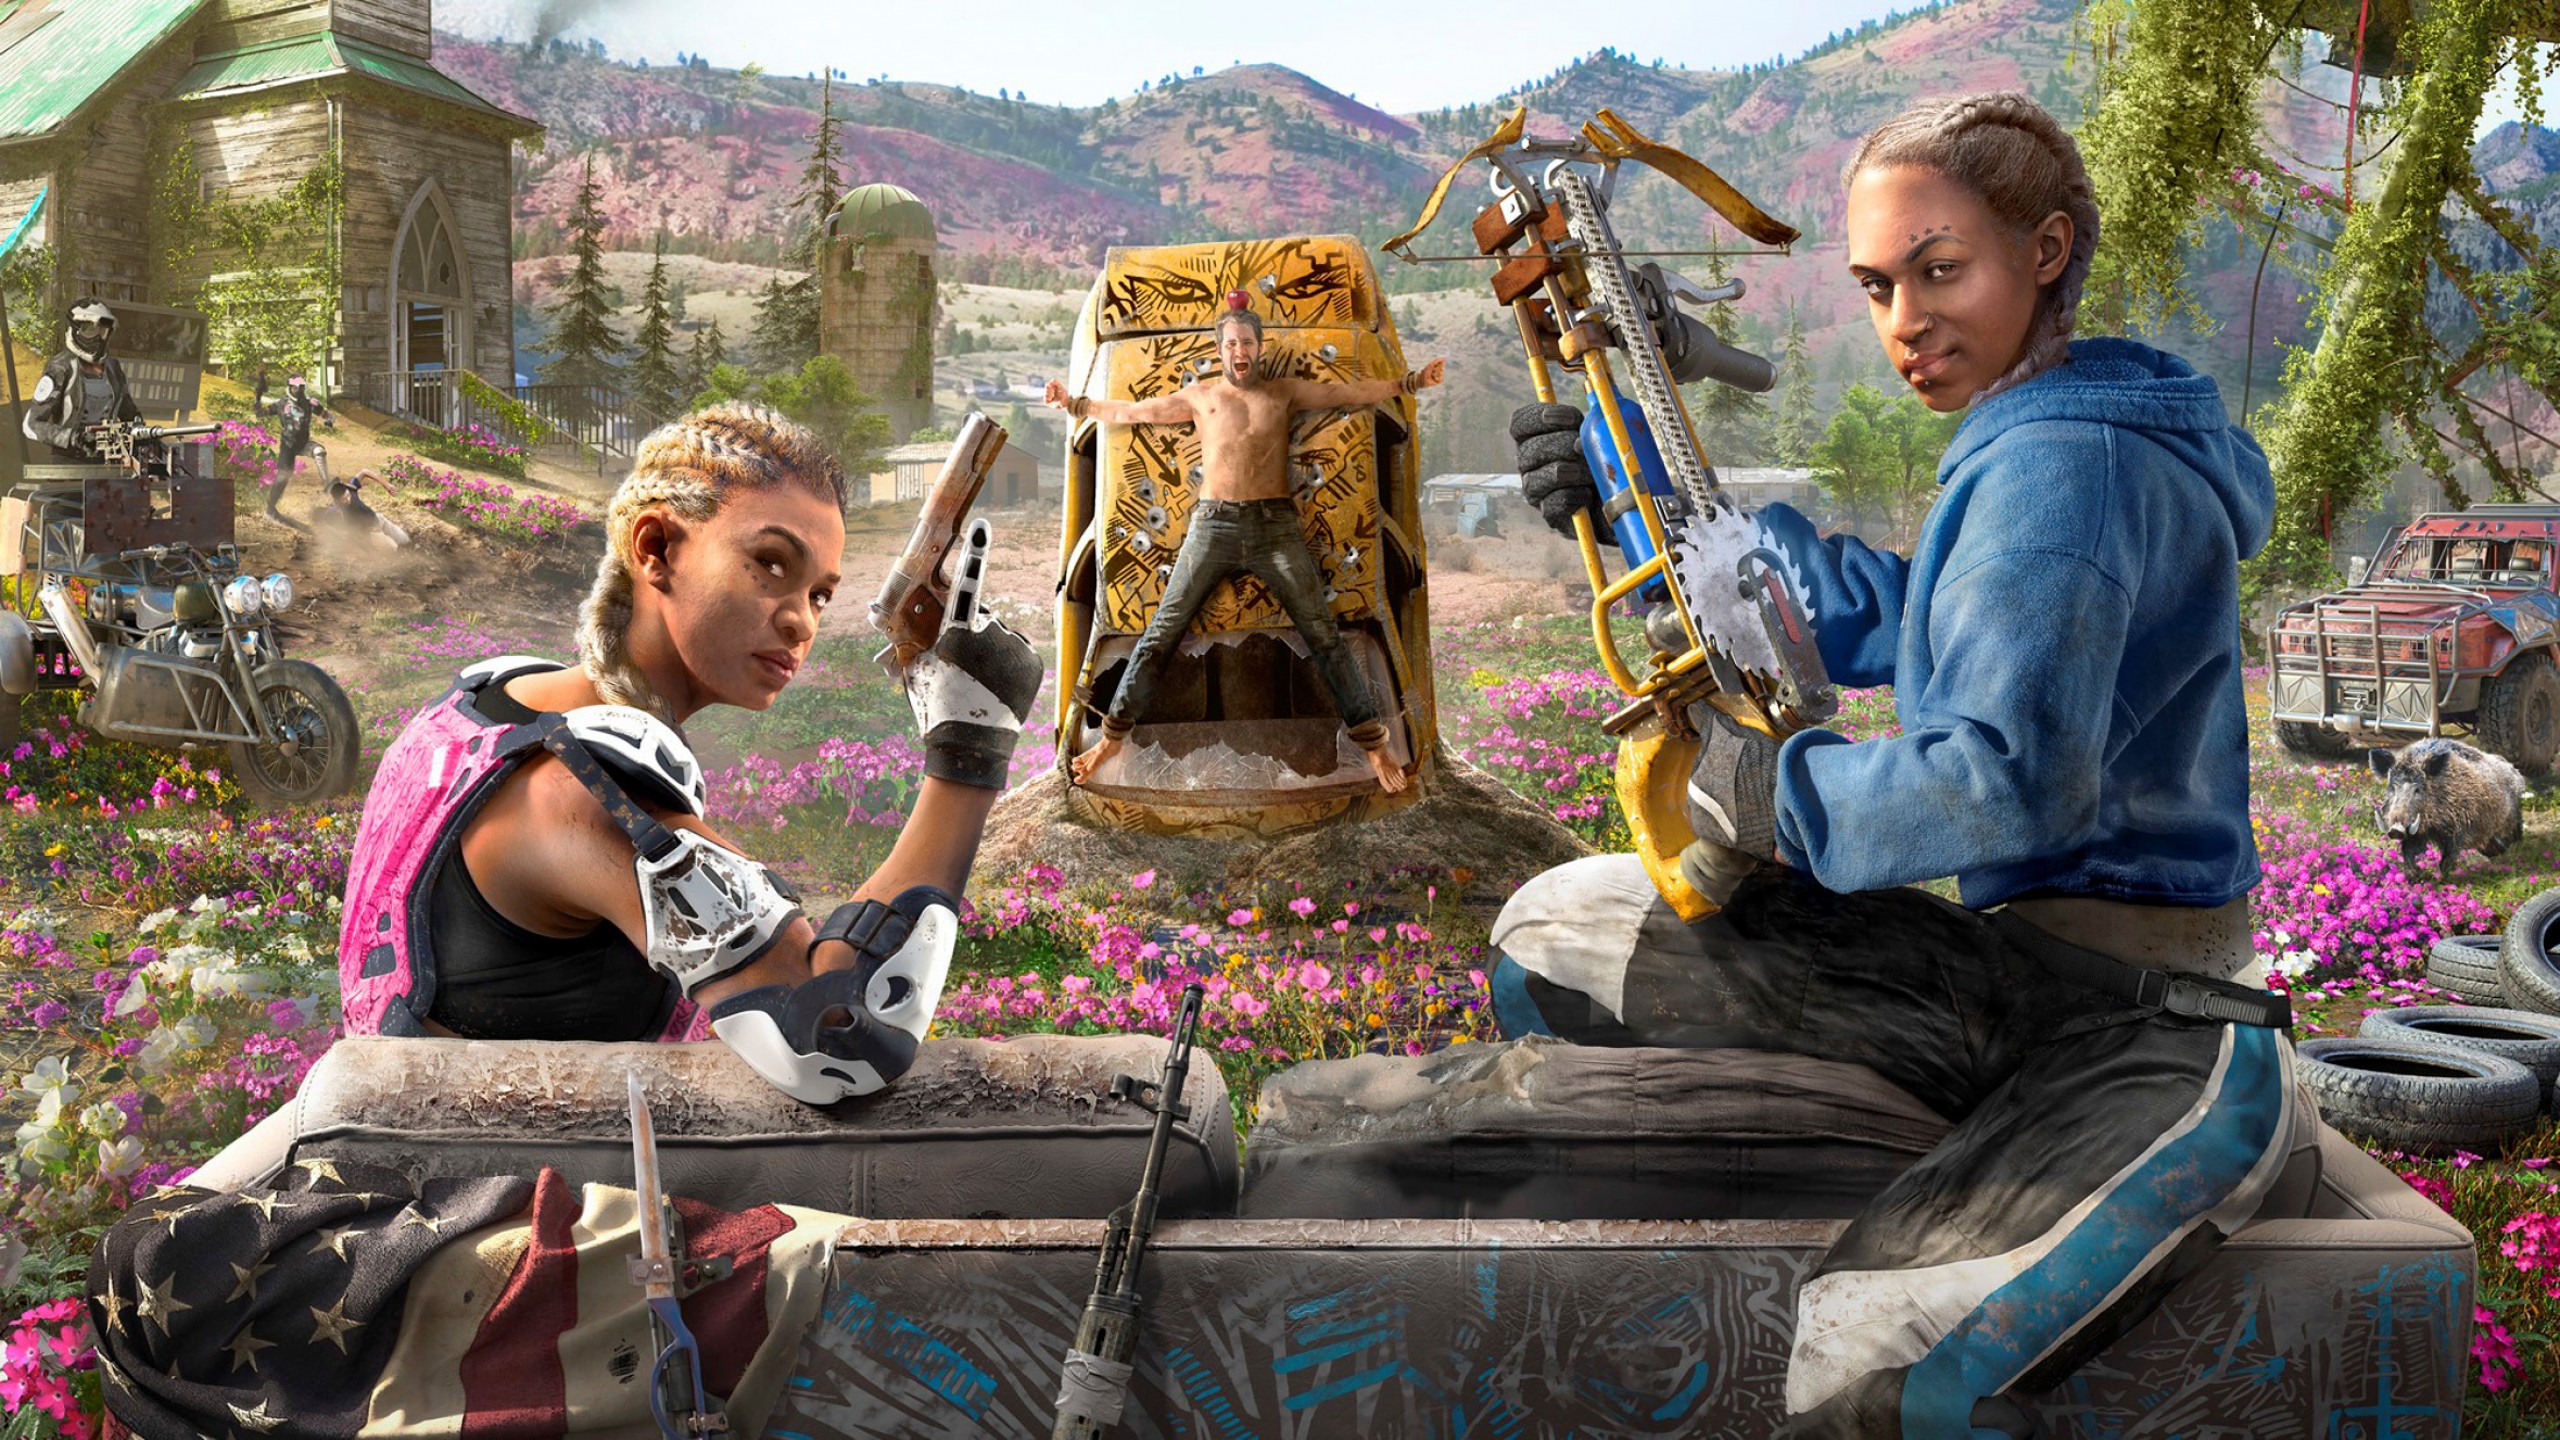 General 2560x1440 Far Cry New Dawn video games Ubisoft video game characters